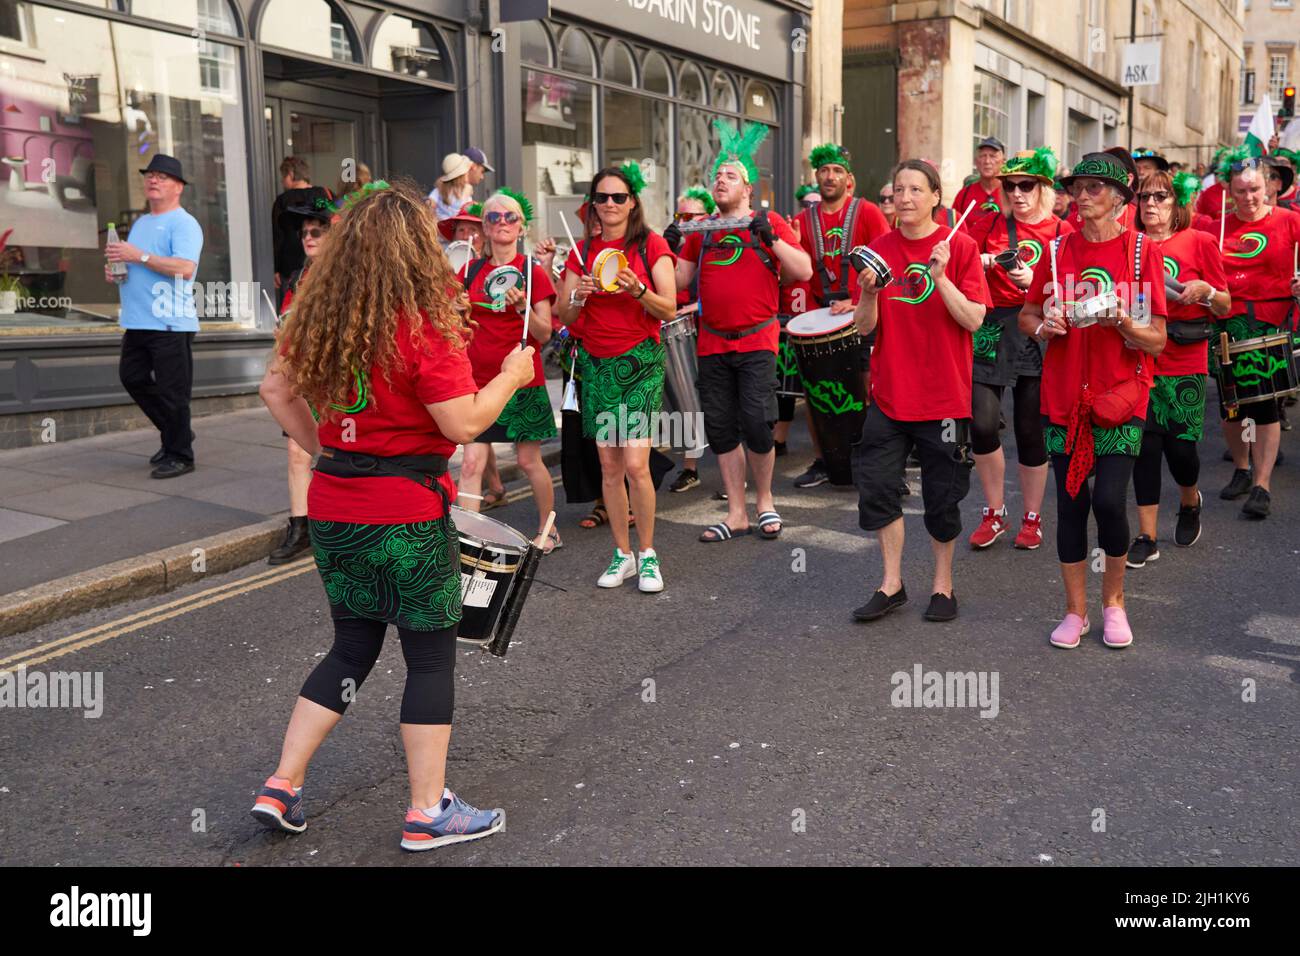 Drumming band performing at the annual carnival as it progresses through the streets of the historic city of Bath in Somerset. Stock Photo